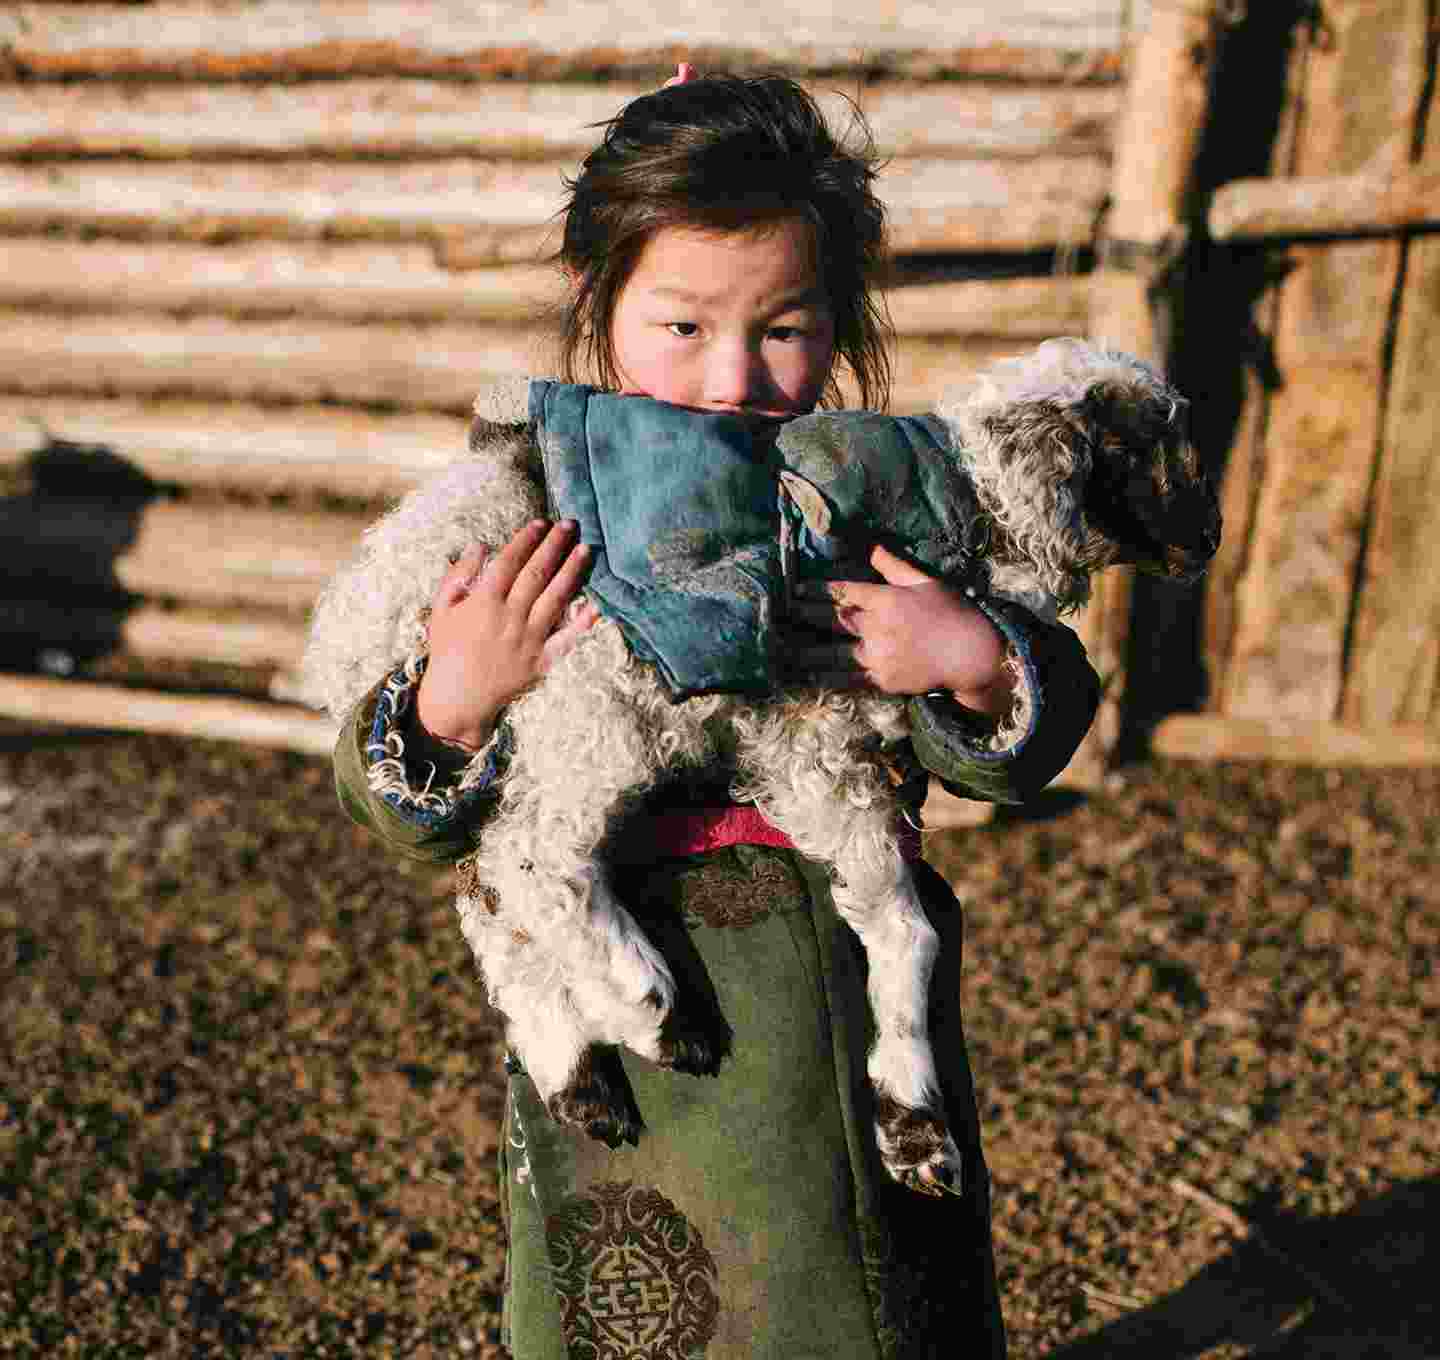 Small Mongolian girl with a lamb on her lap.